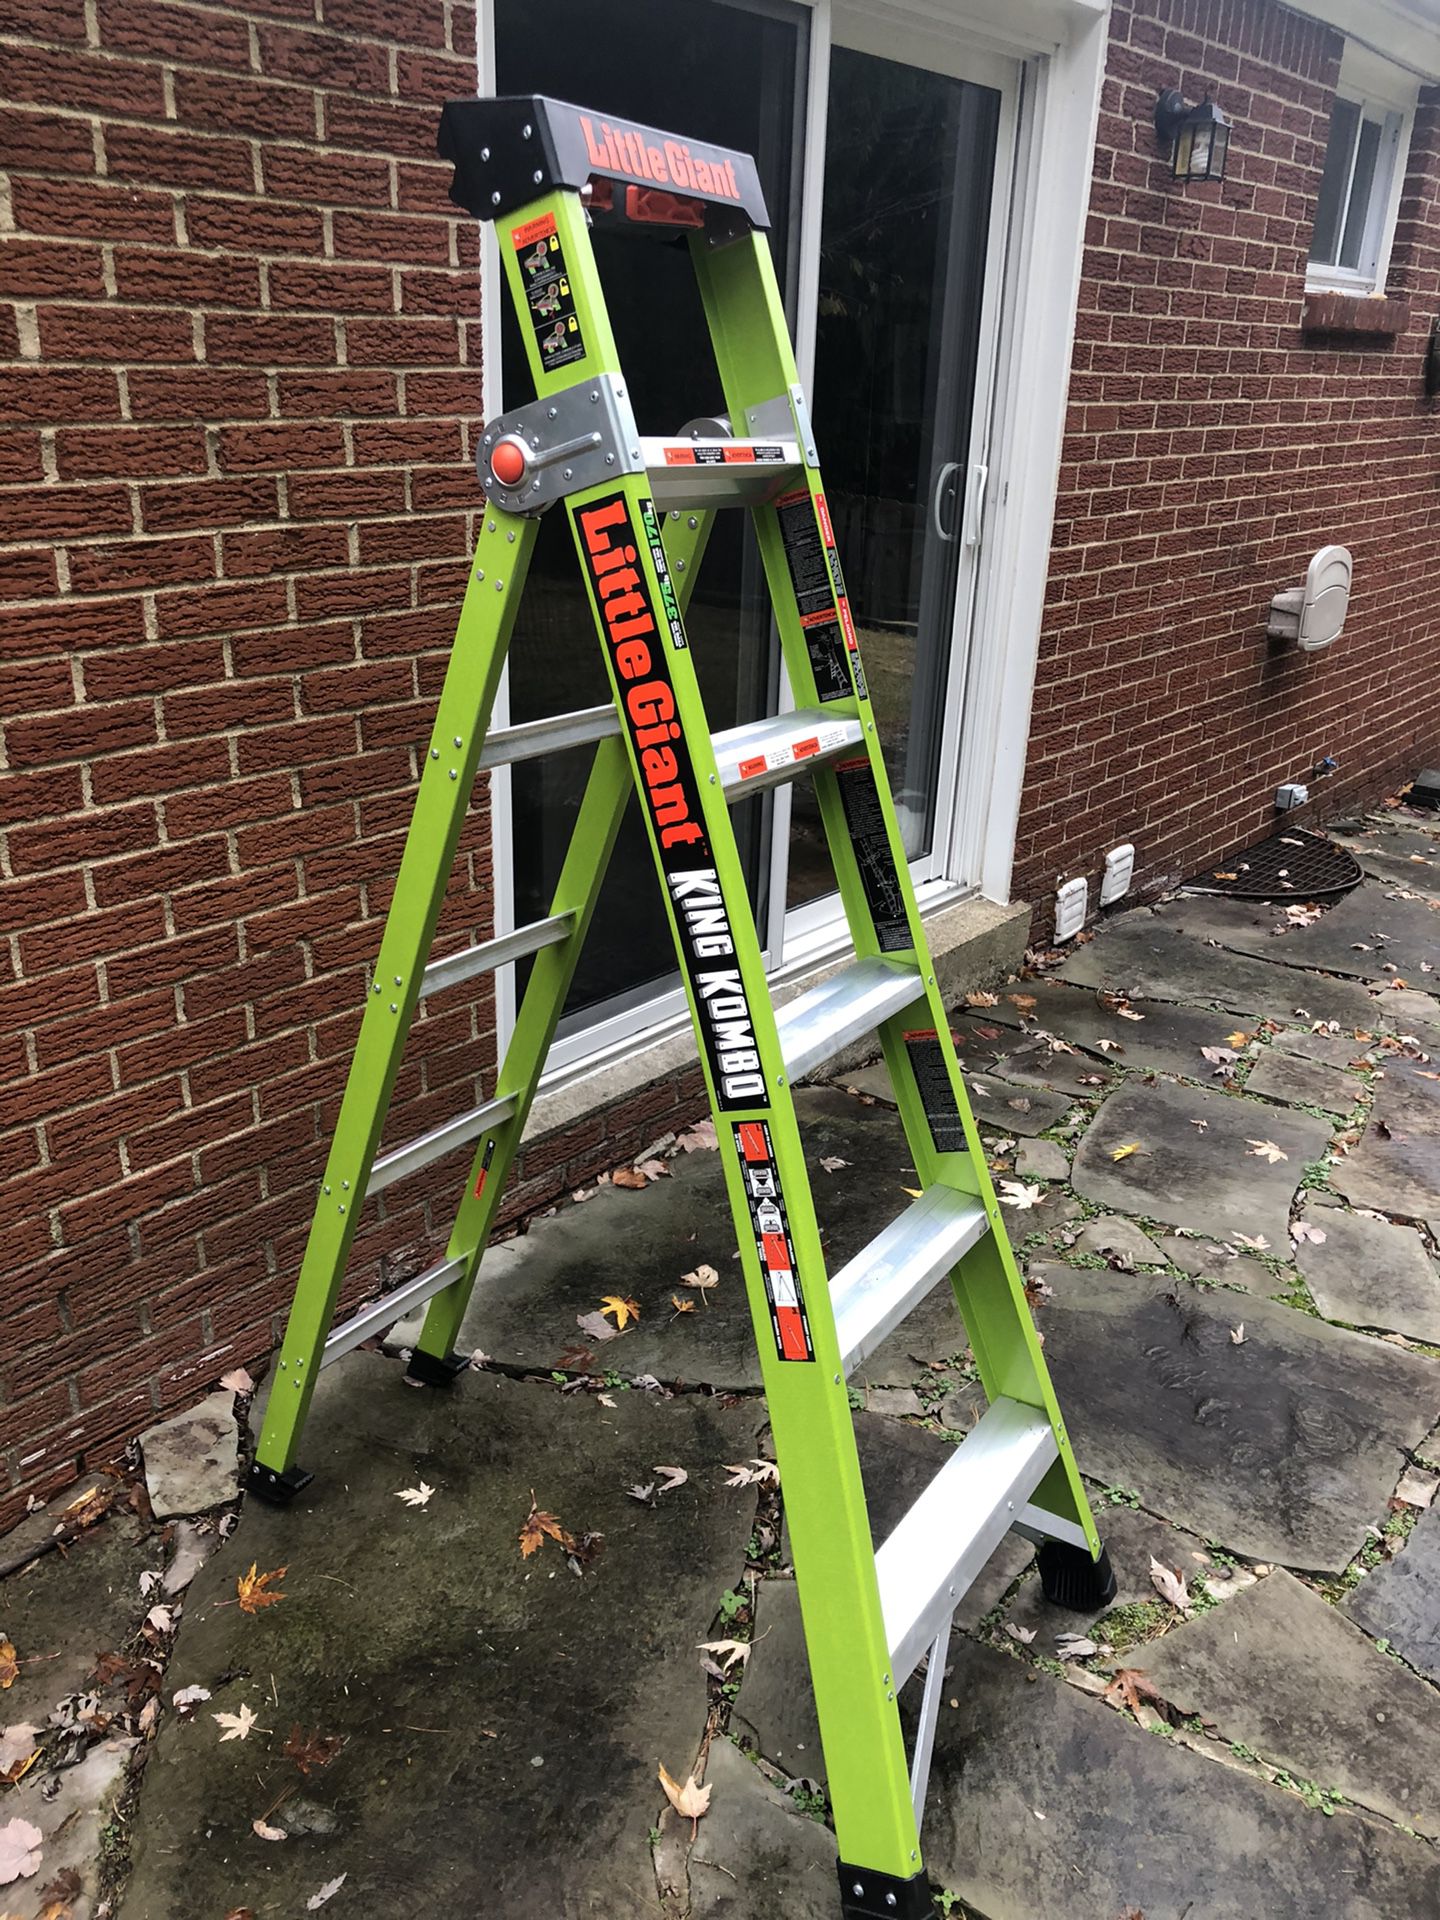 Little Giant King Kombo ladder. Literally brand new. Bought the wrong size off amazon. I mean brand new. Payed $159 for it on amazon. Folding ladder